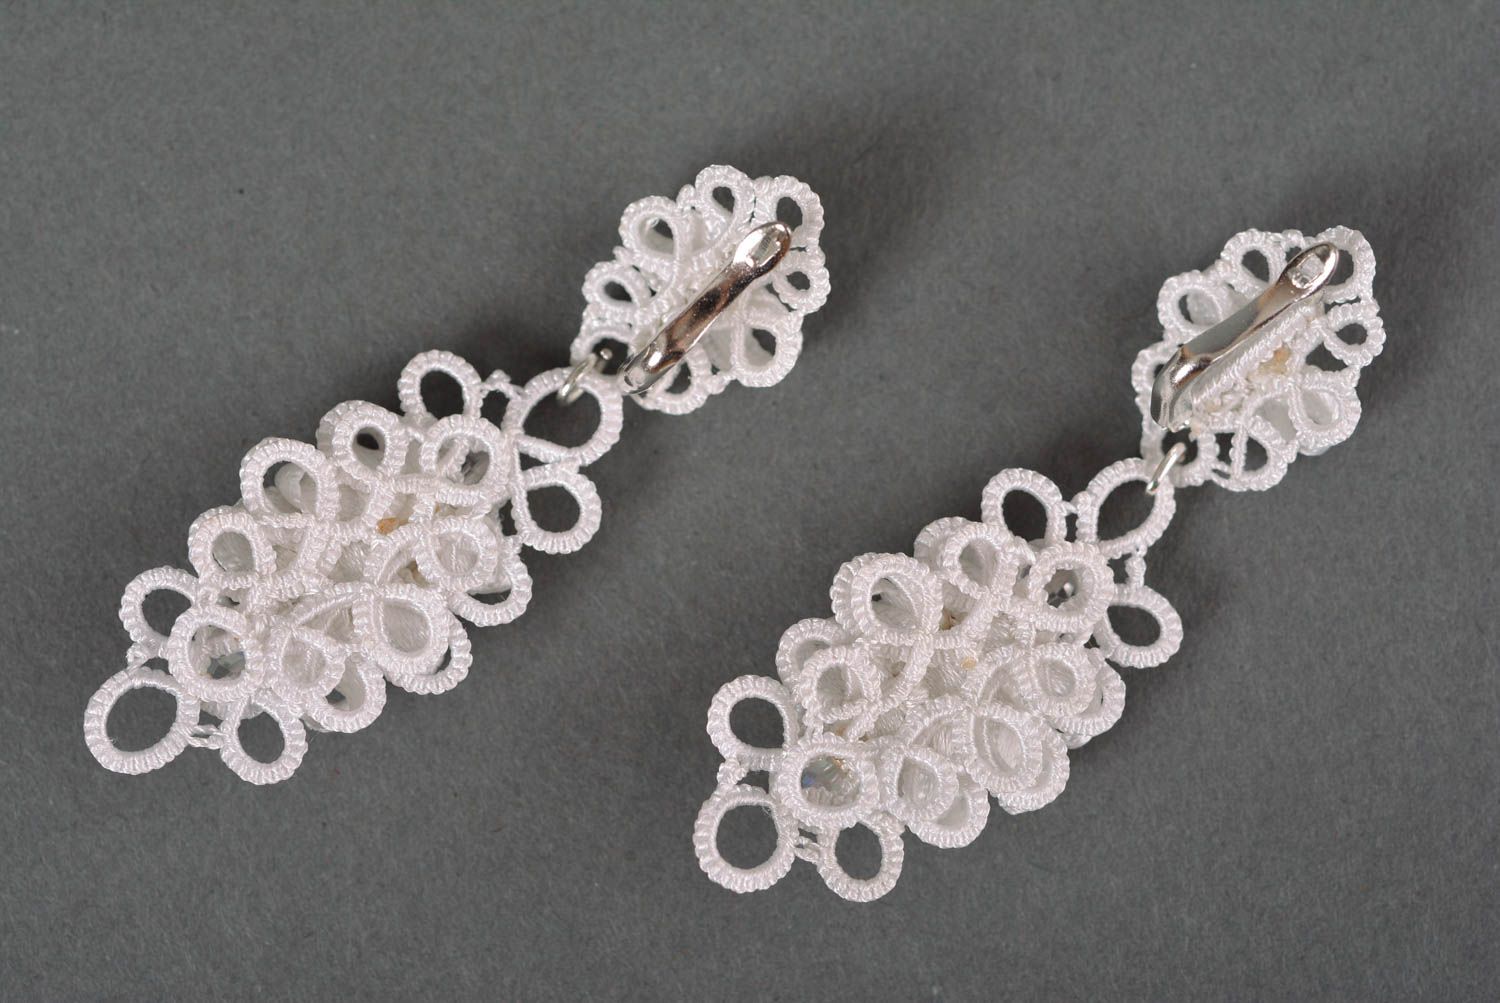 Long earrings homemade jewelry earrings designs tatting lace gift ideas for girl photo 5